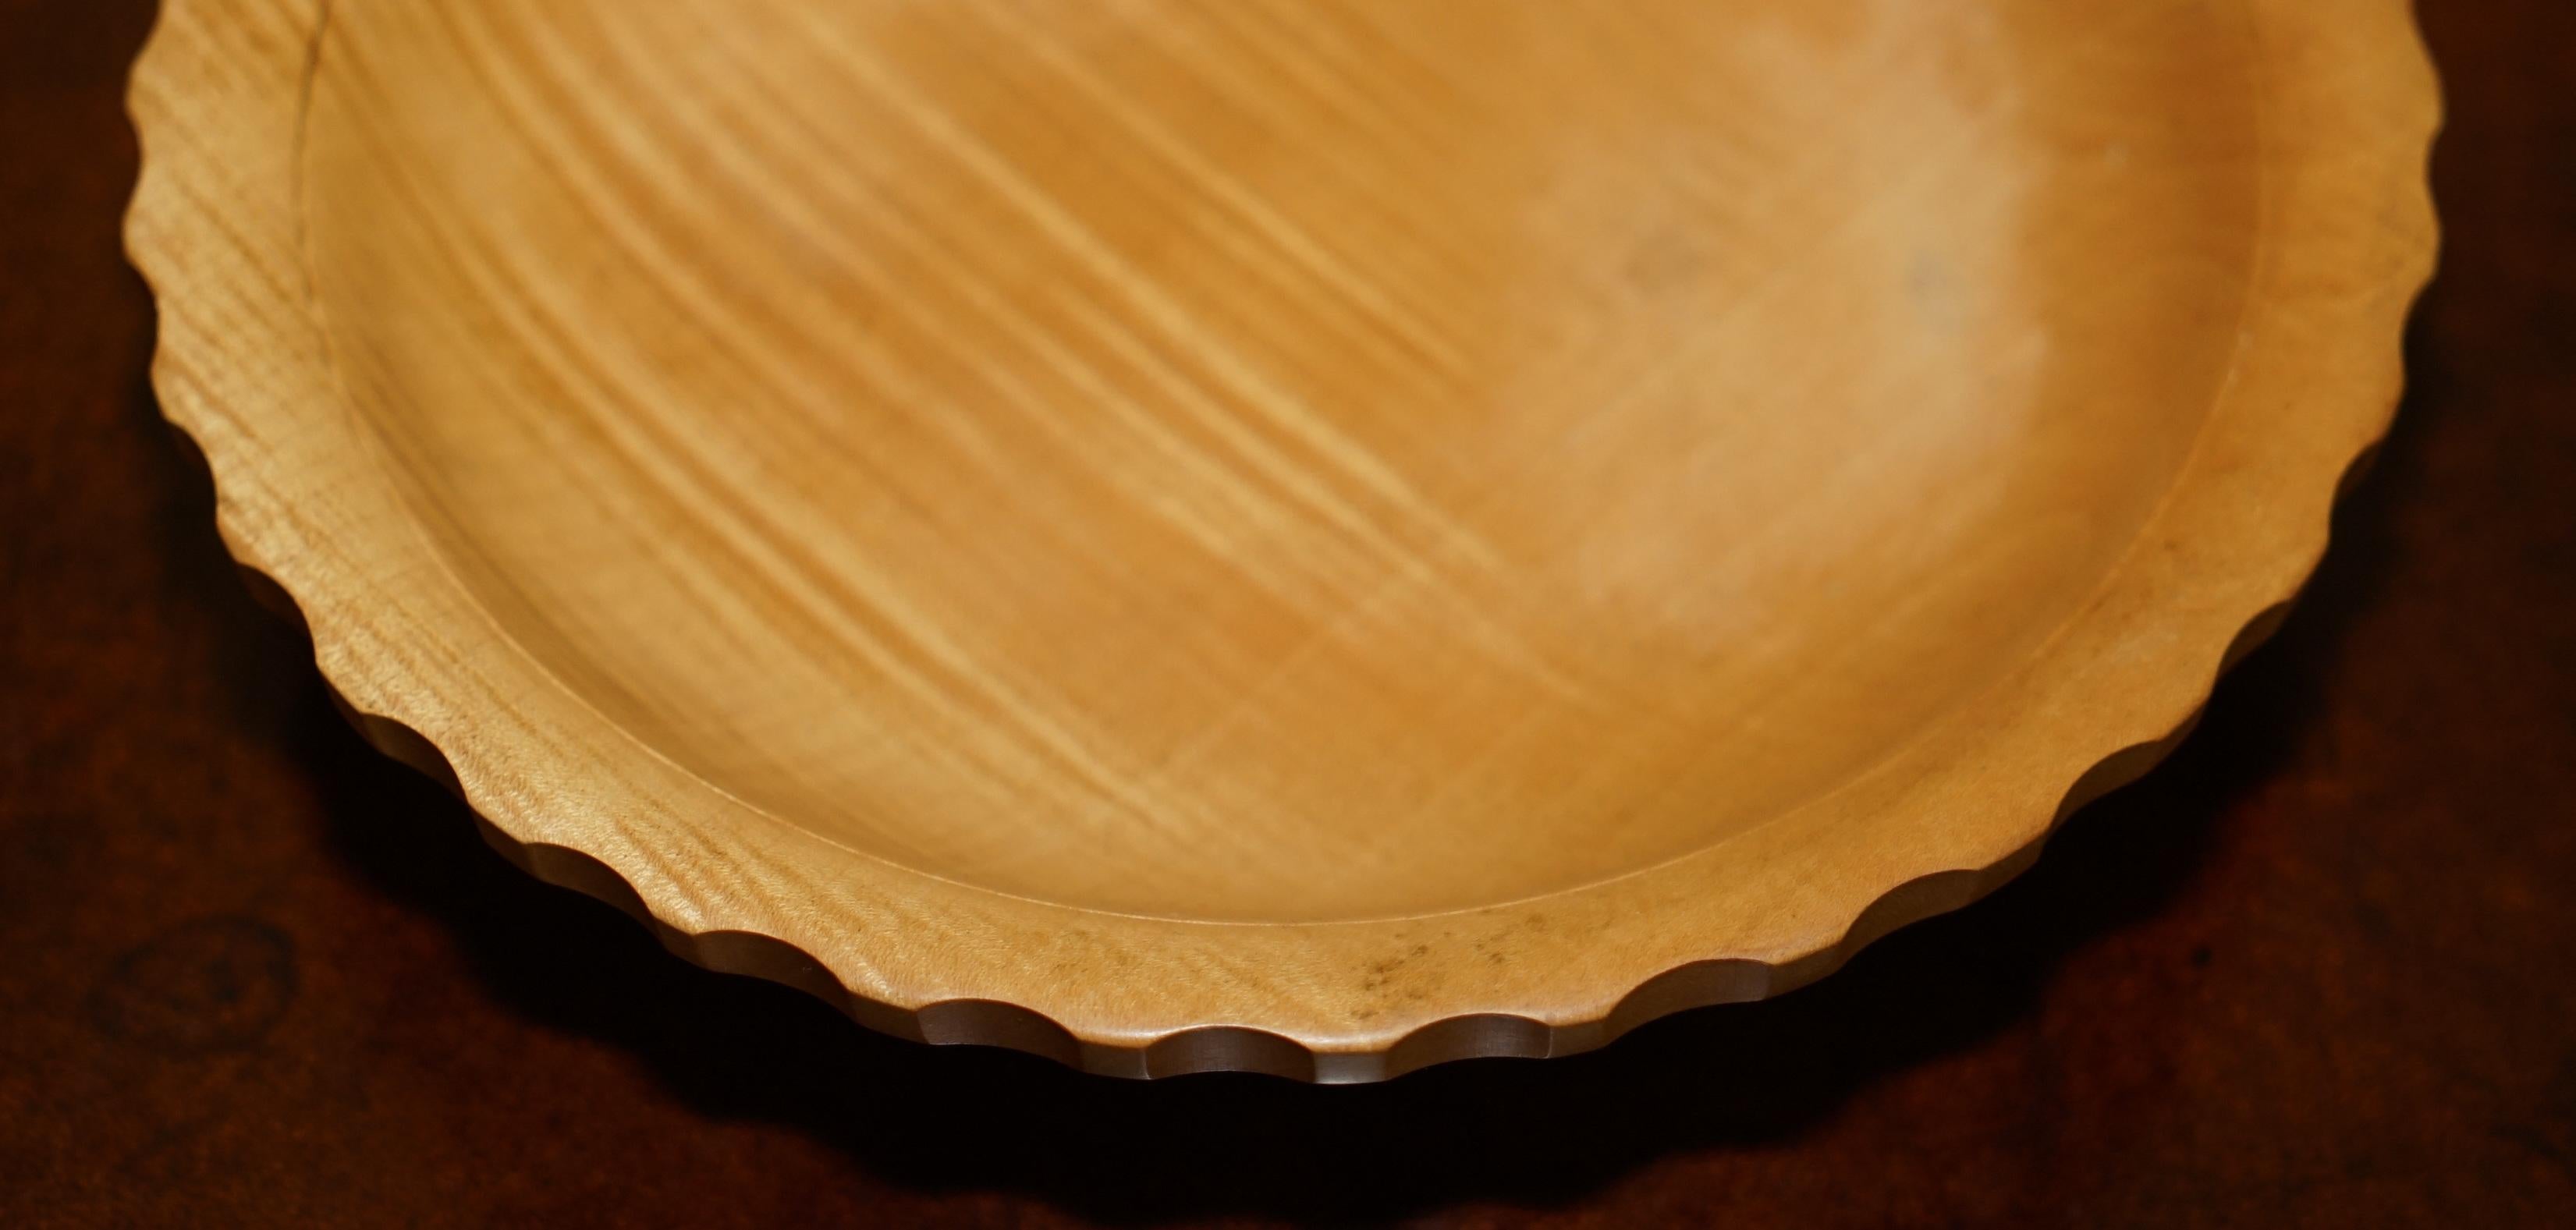 Sycamore HAND MADE ViNTAGE RIPPLE SYCAMORE FRUIT BOWL SIGNED TO THE BASE BOB FRENCH For Sale